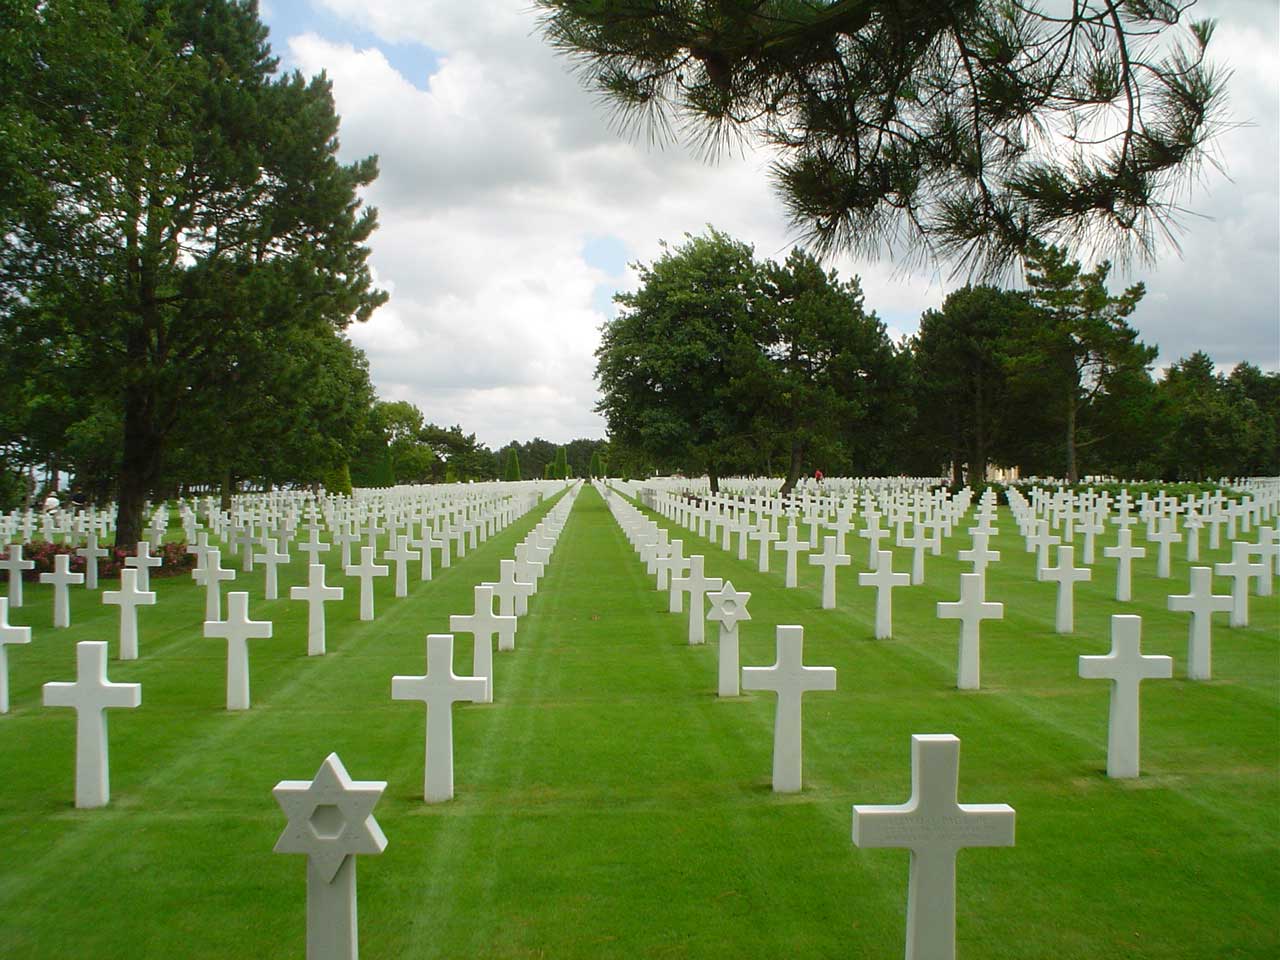 American military cemetery at Normandy, summer 2003